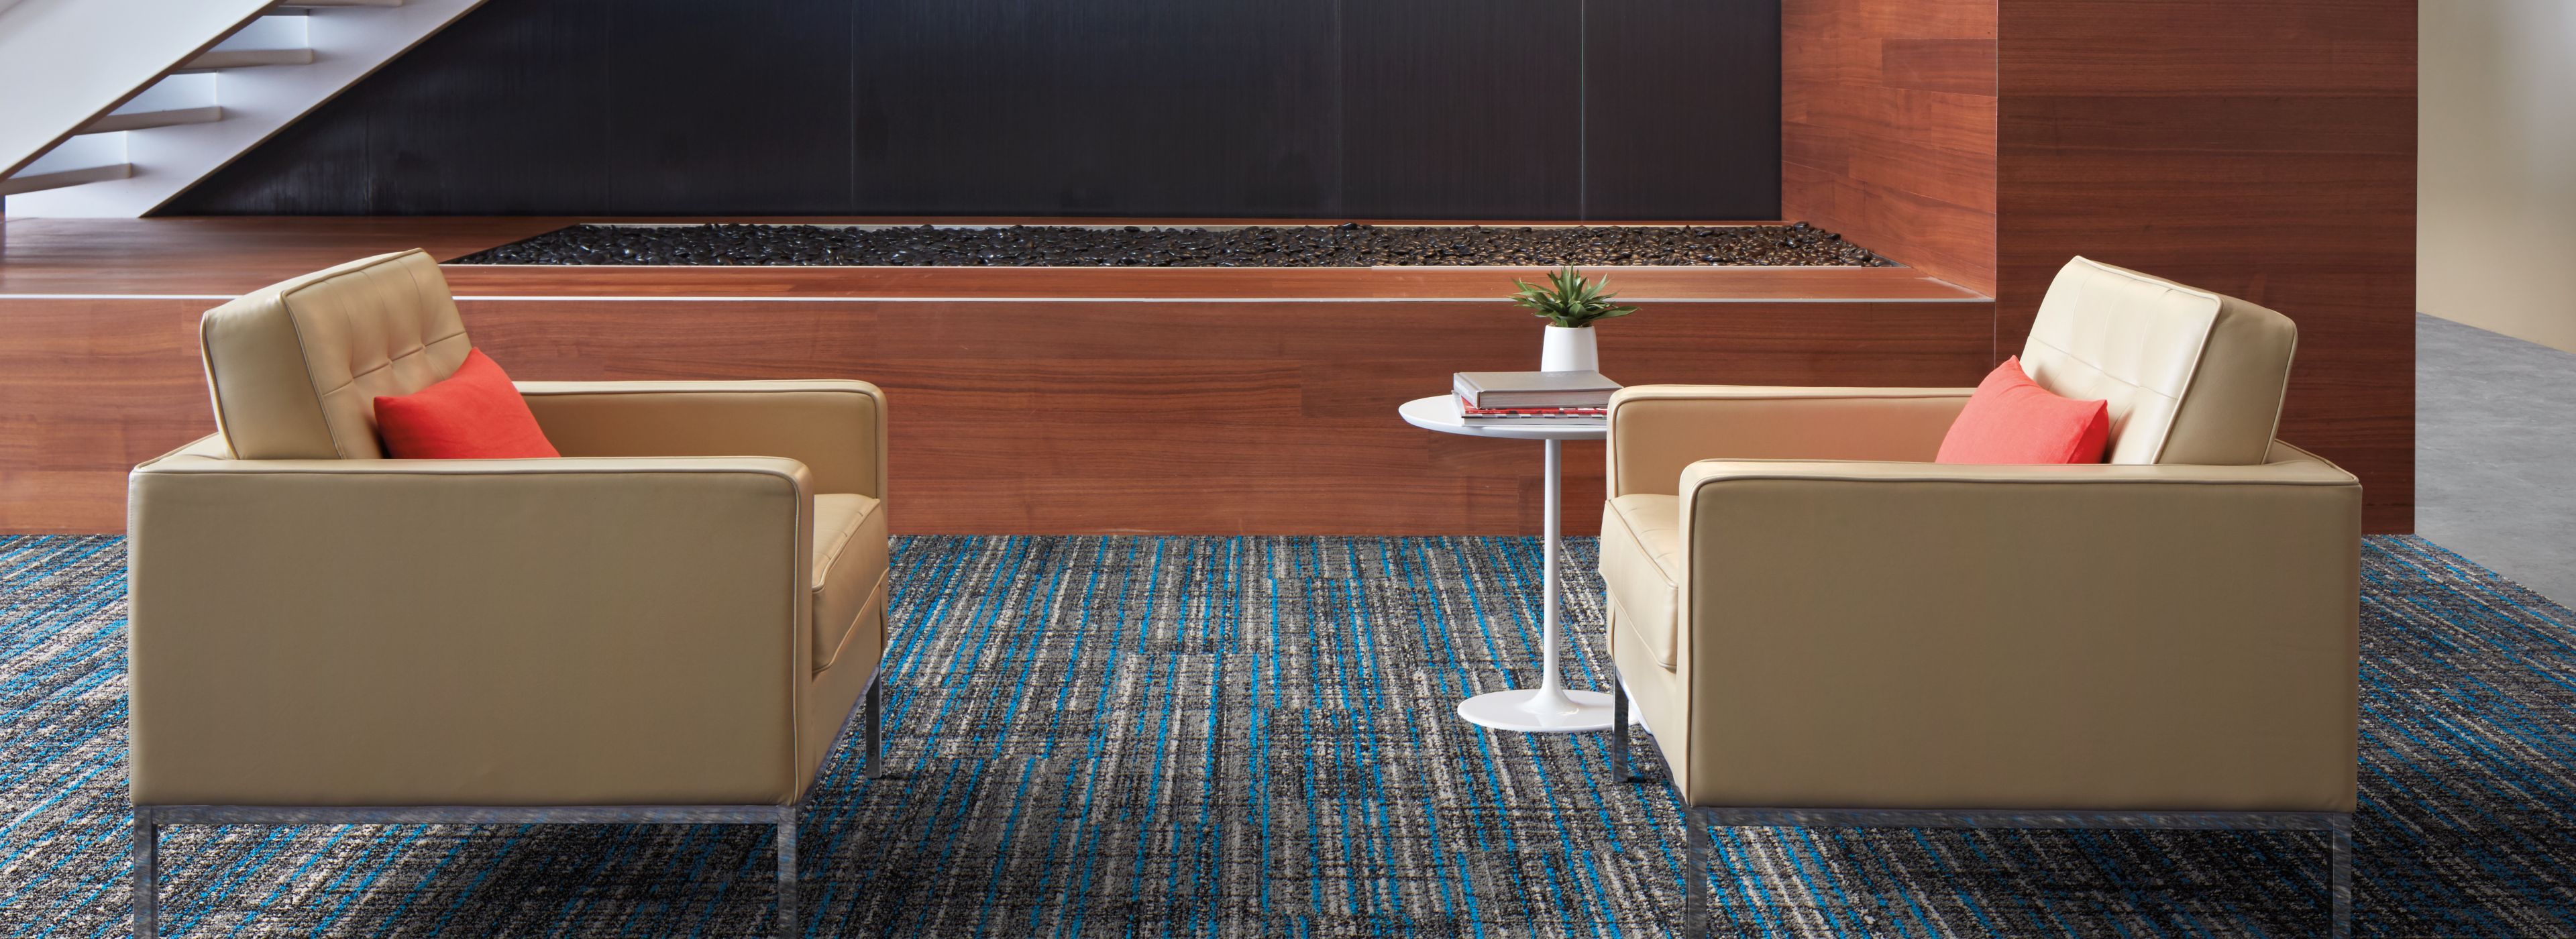 Interface Upload carpet tile and Textured Stones LVT in lobby area with couches imagen número 1